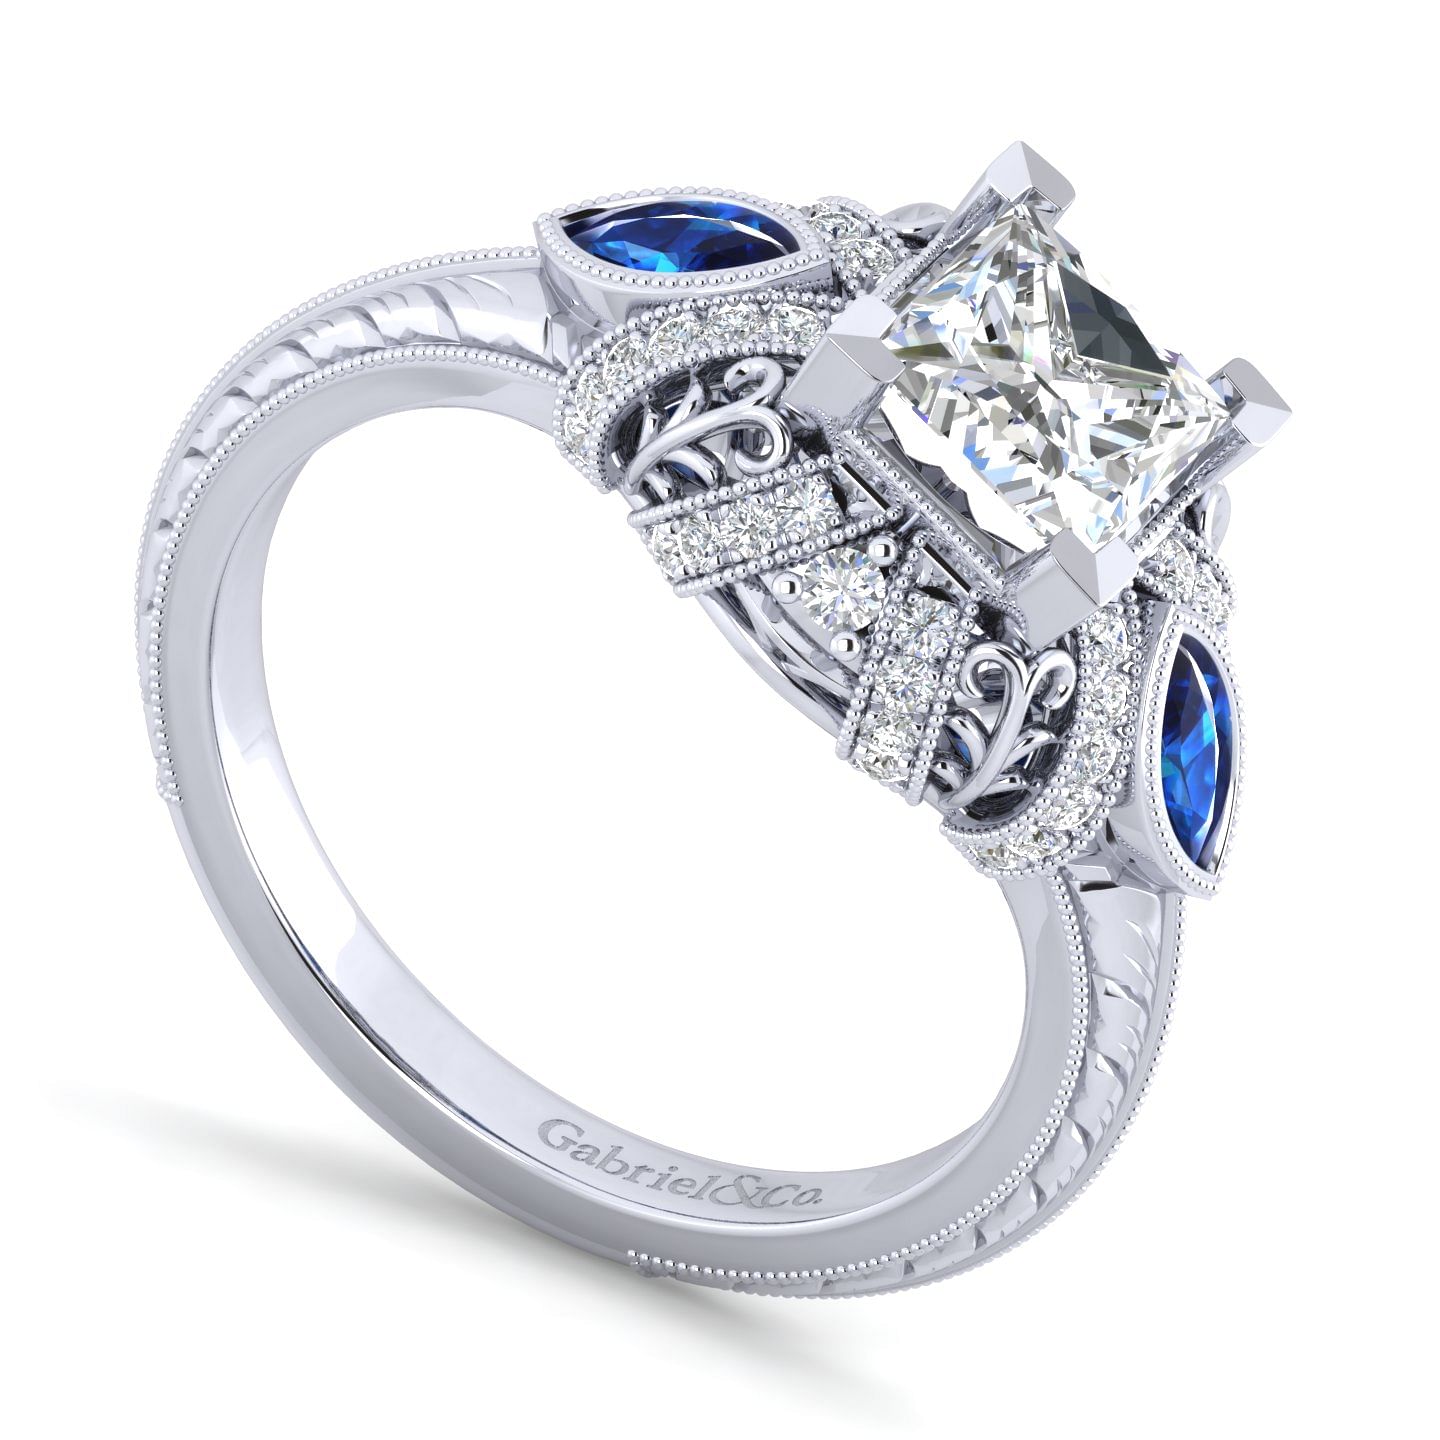 Vintage Inspired 14K White Gold Princess Halo Three Stone Sapphire and Diamond Engagement Ring